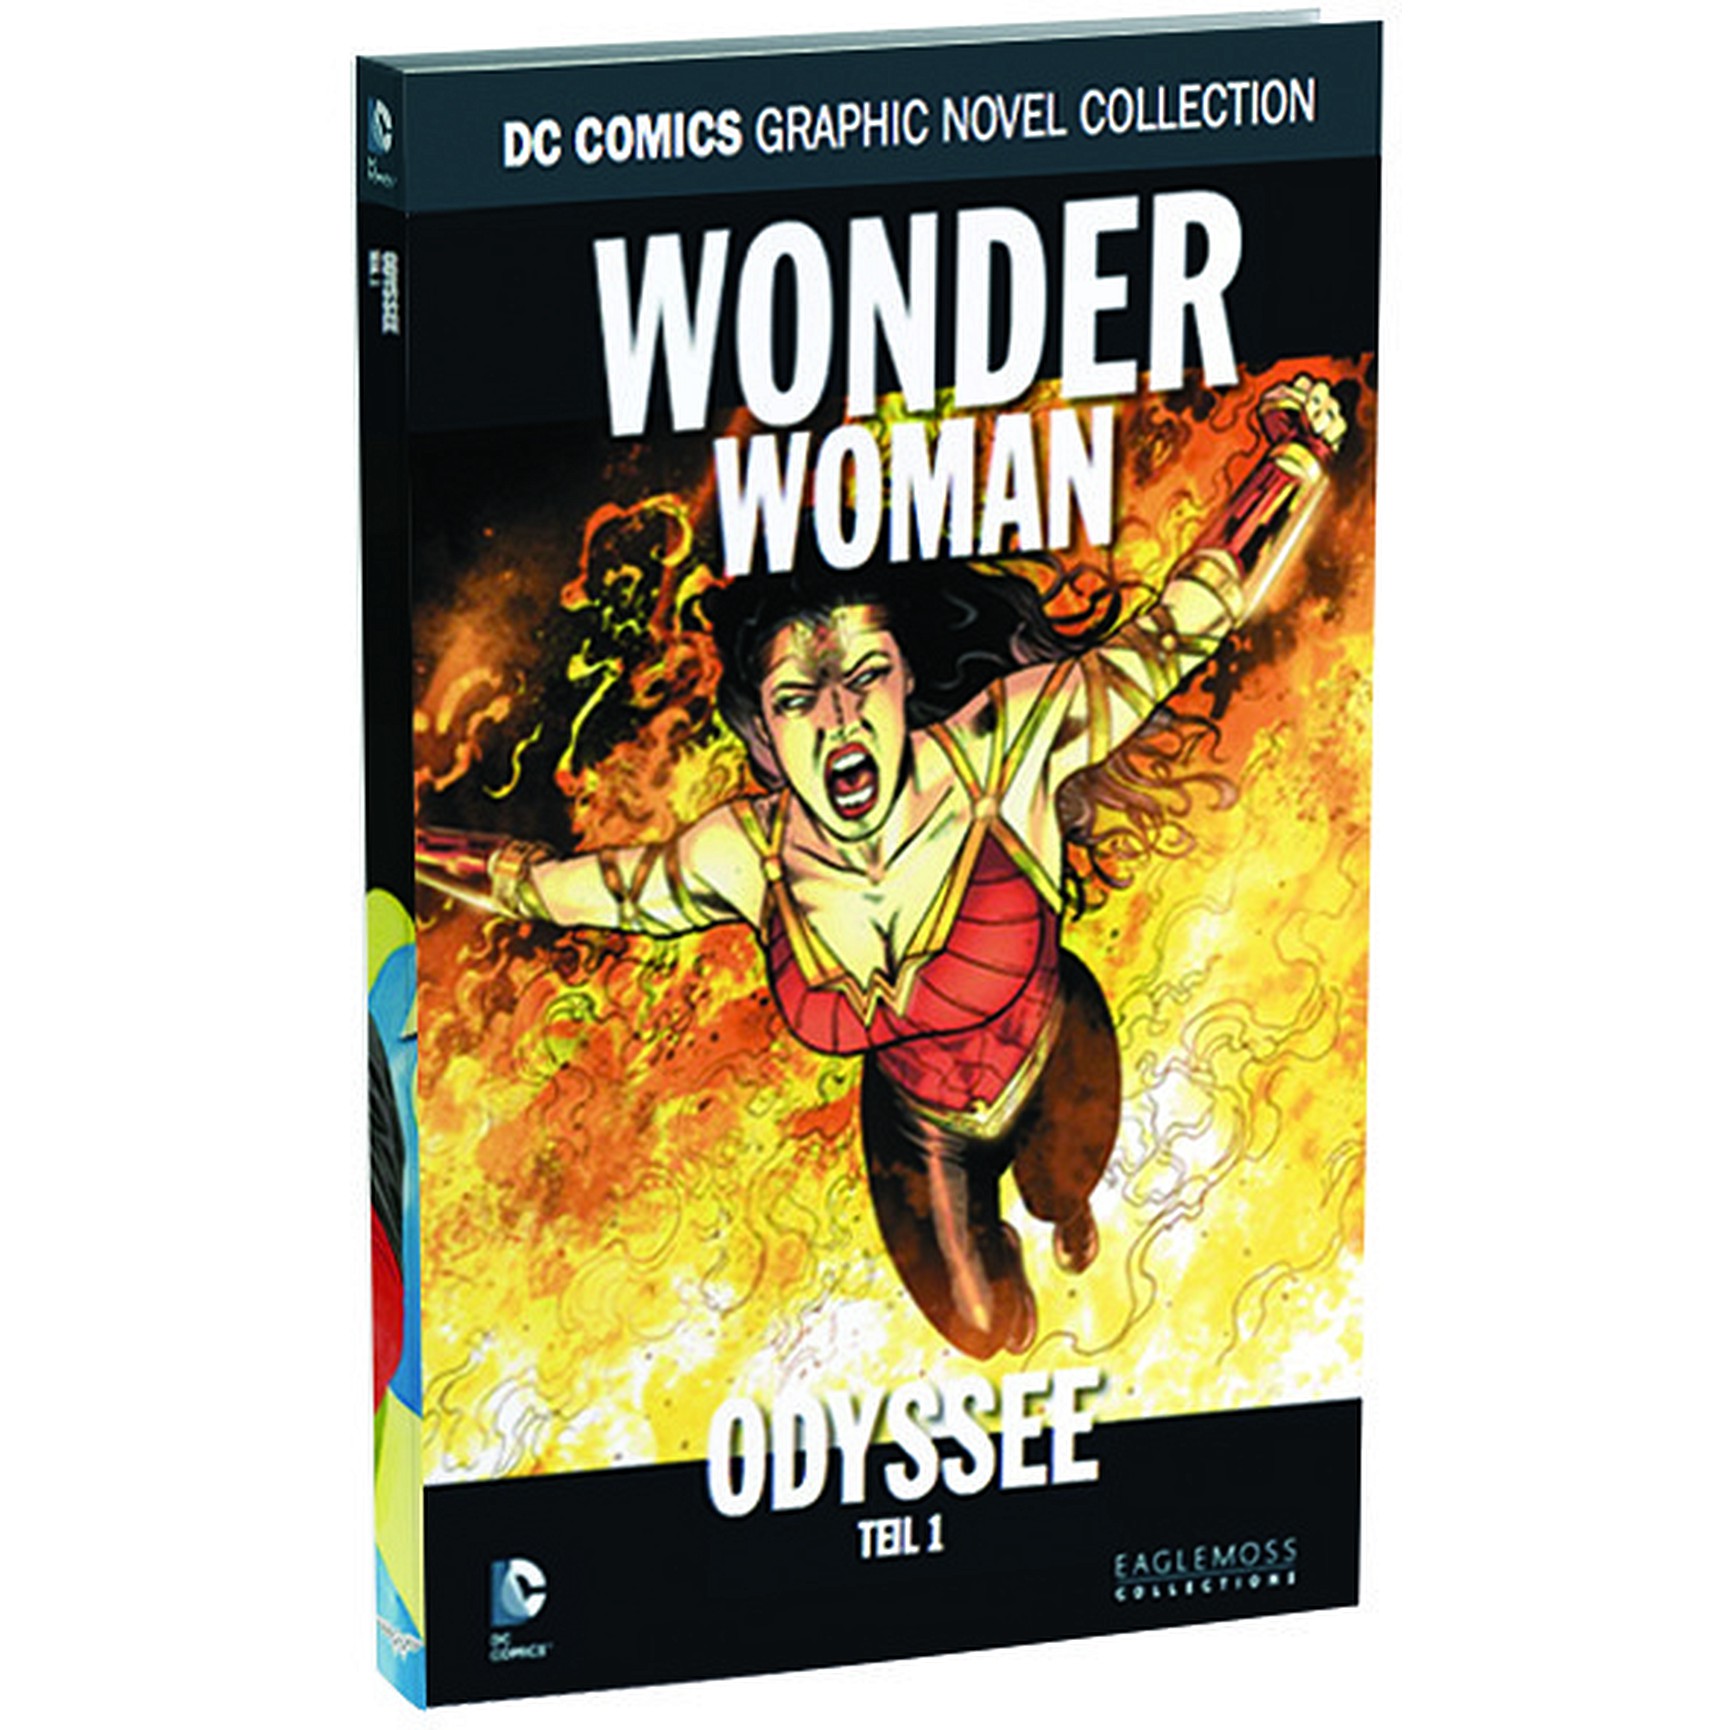 DC Comics Graphic Novel Collection Wonder Woman - Odysee Teil 2